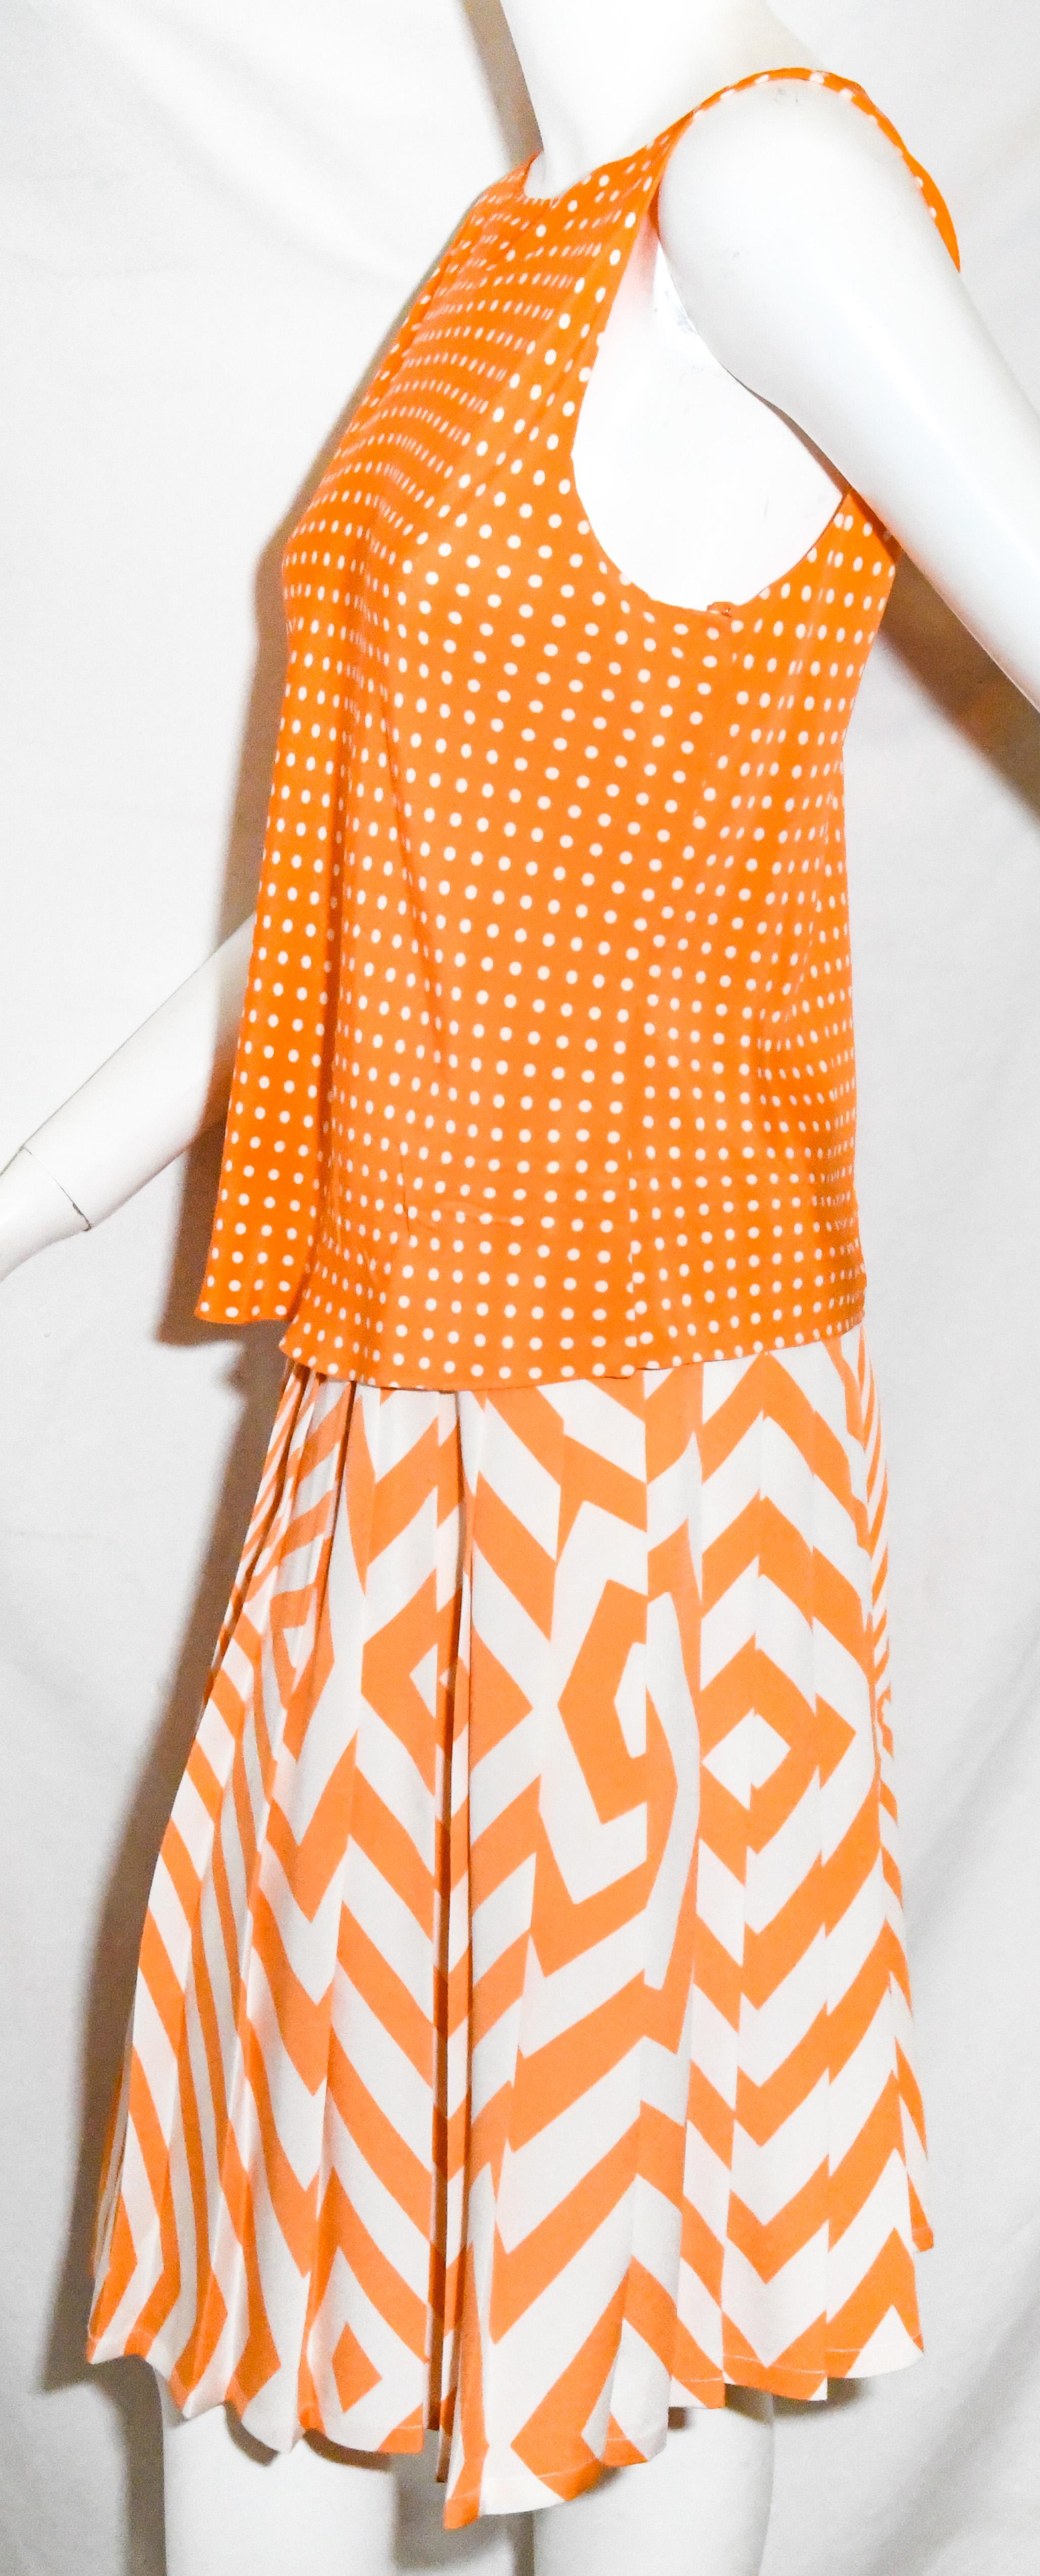 Oscar de la Renta orange and white two piece dress that incorporates a polka dot sleeveless top and an abstract  geometric pleated skirt.  The top contains 5 snaps, at back, for closure.  The pleated skirt includes a hook and eye and zipper, for